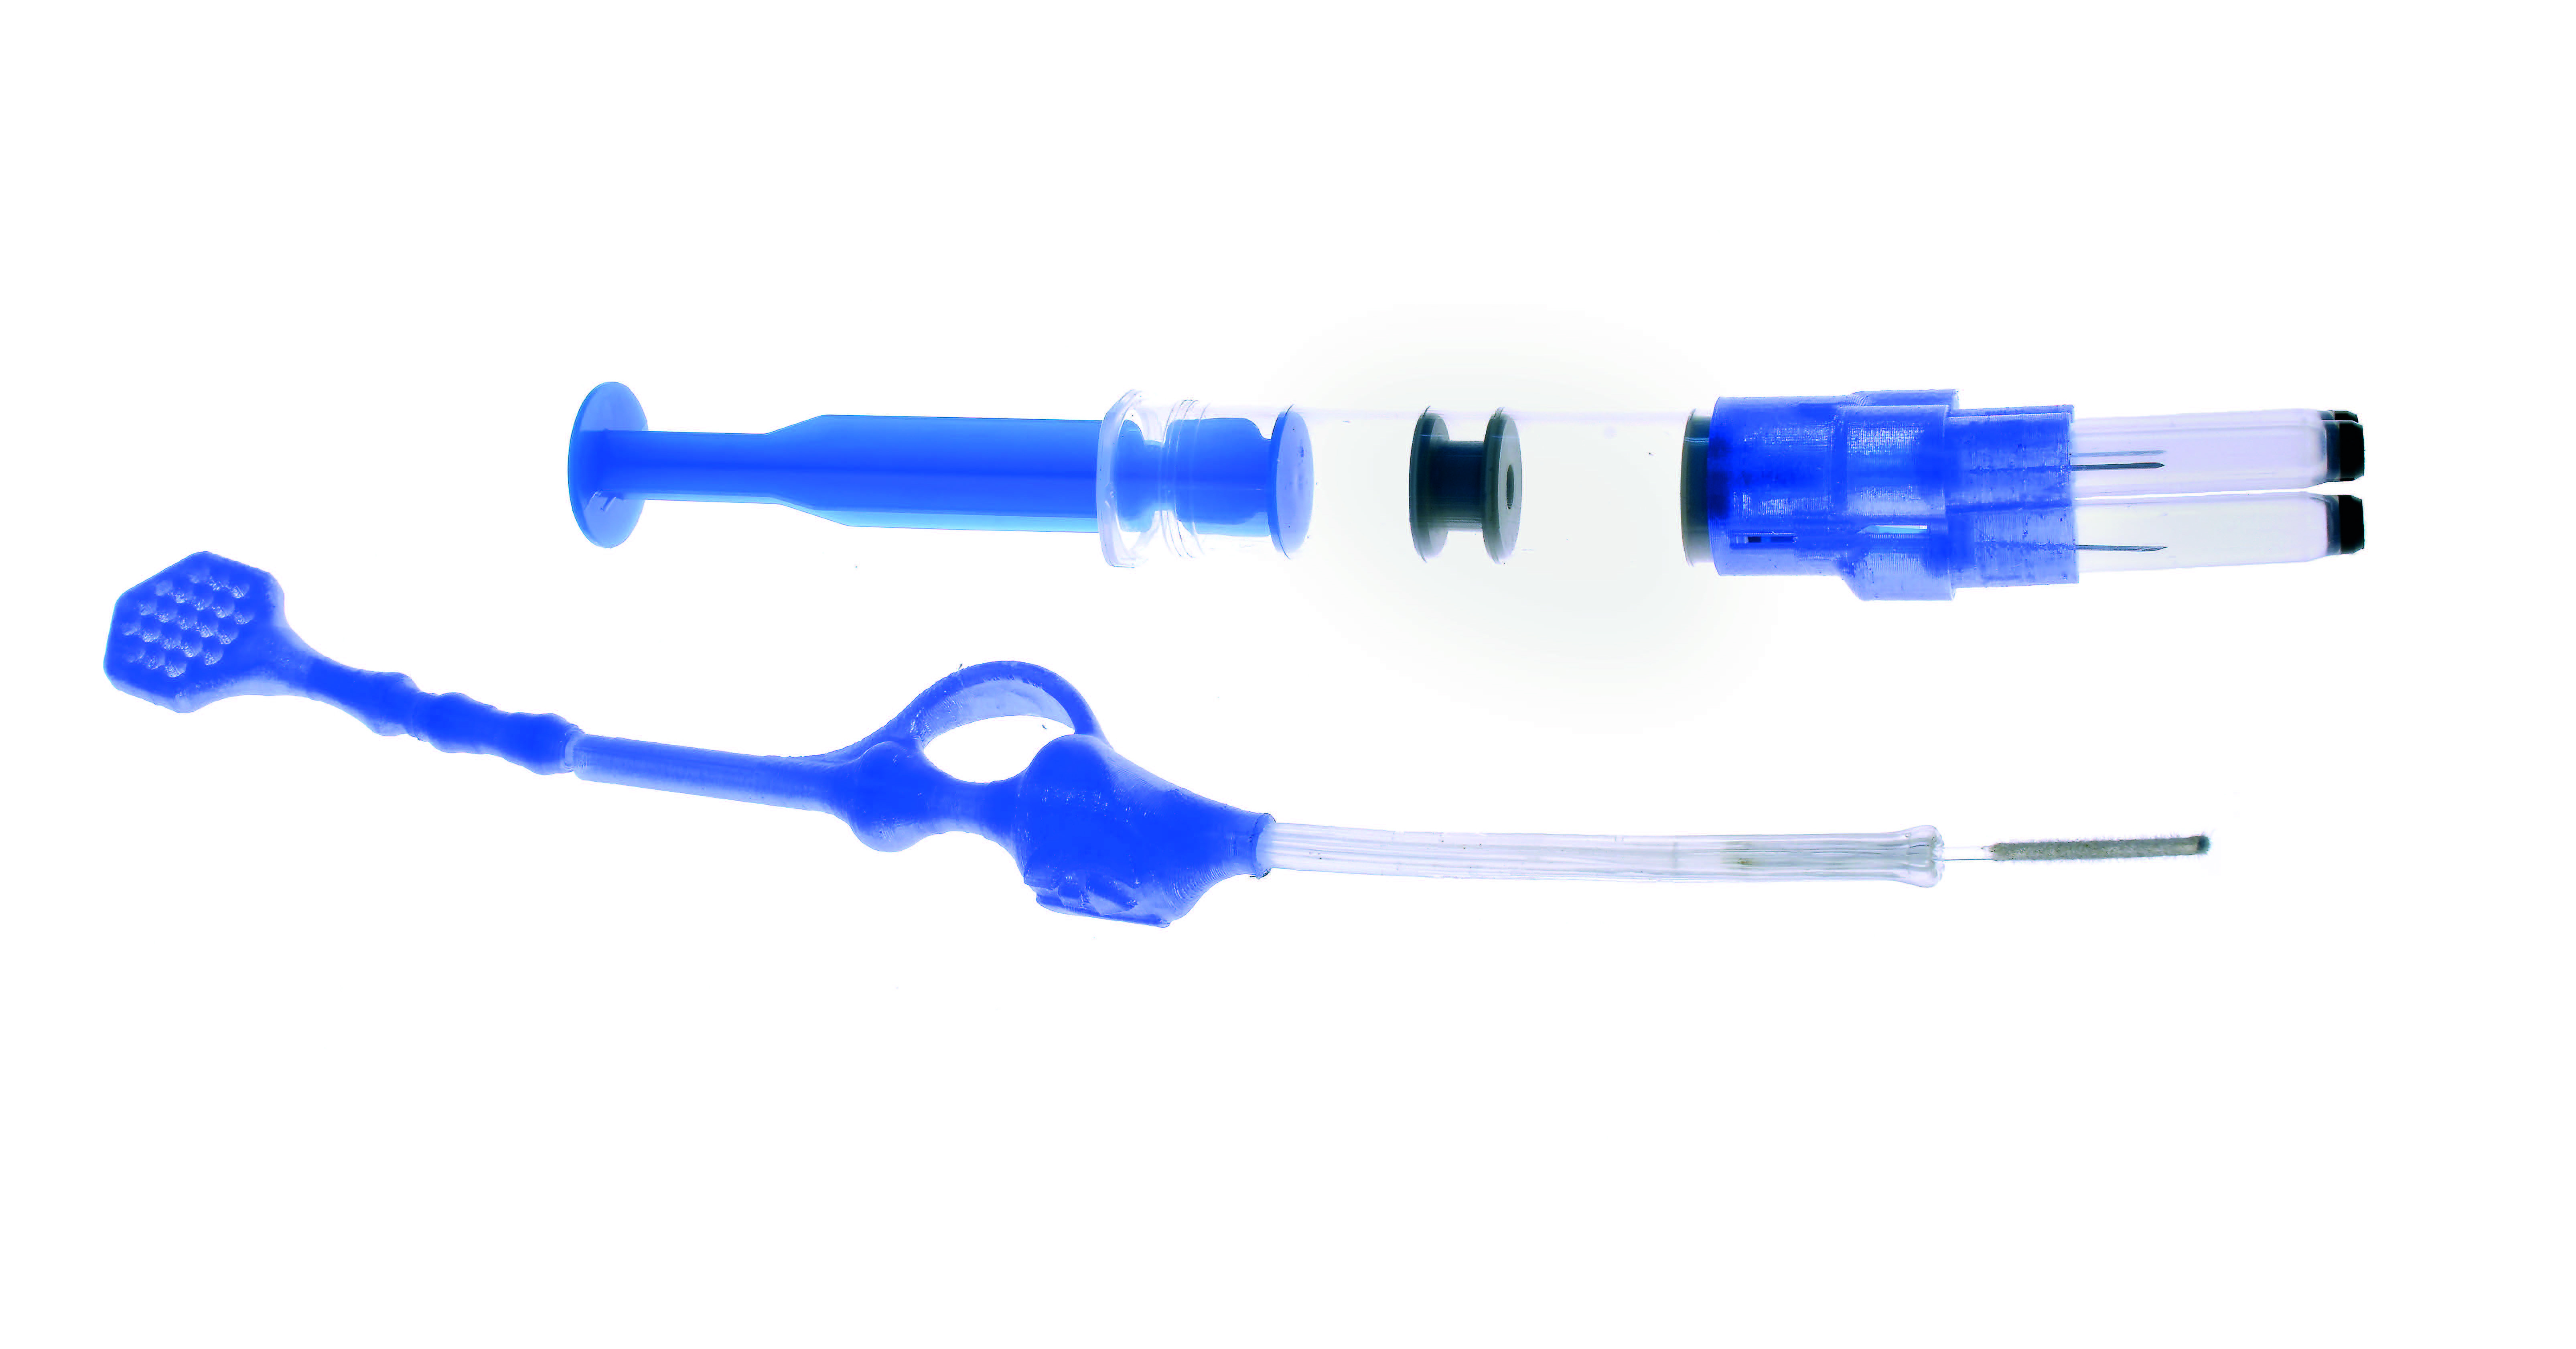 A unique self-sampling swab set for testing for COVID-19